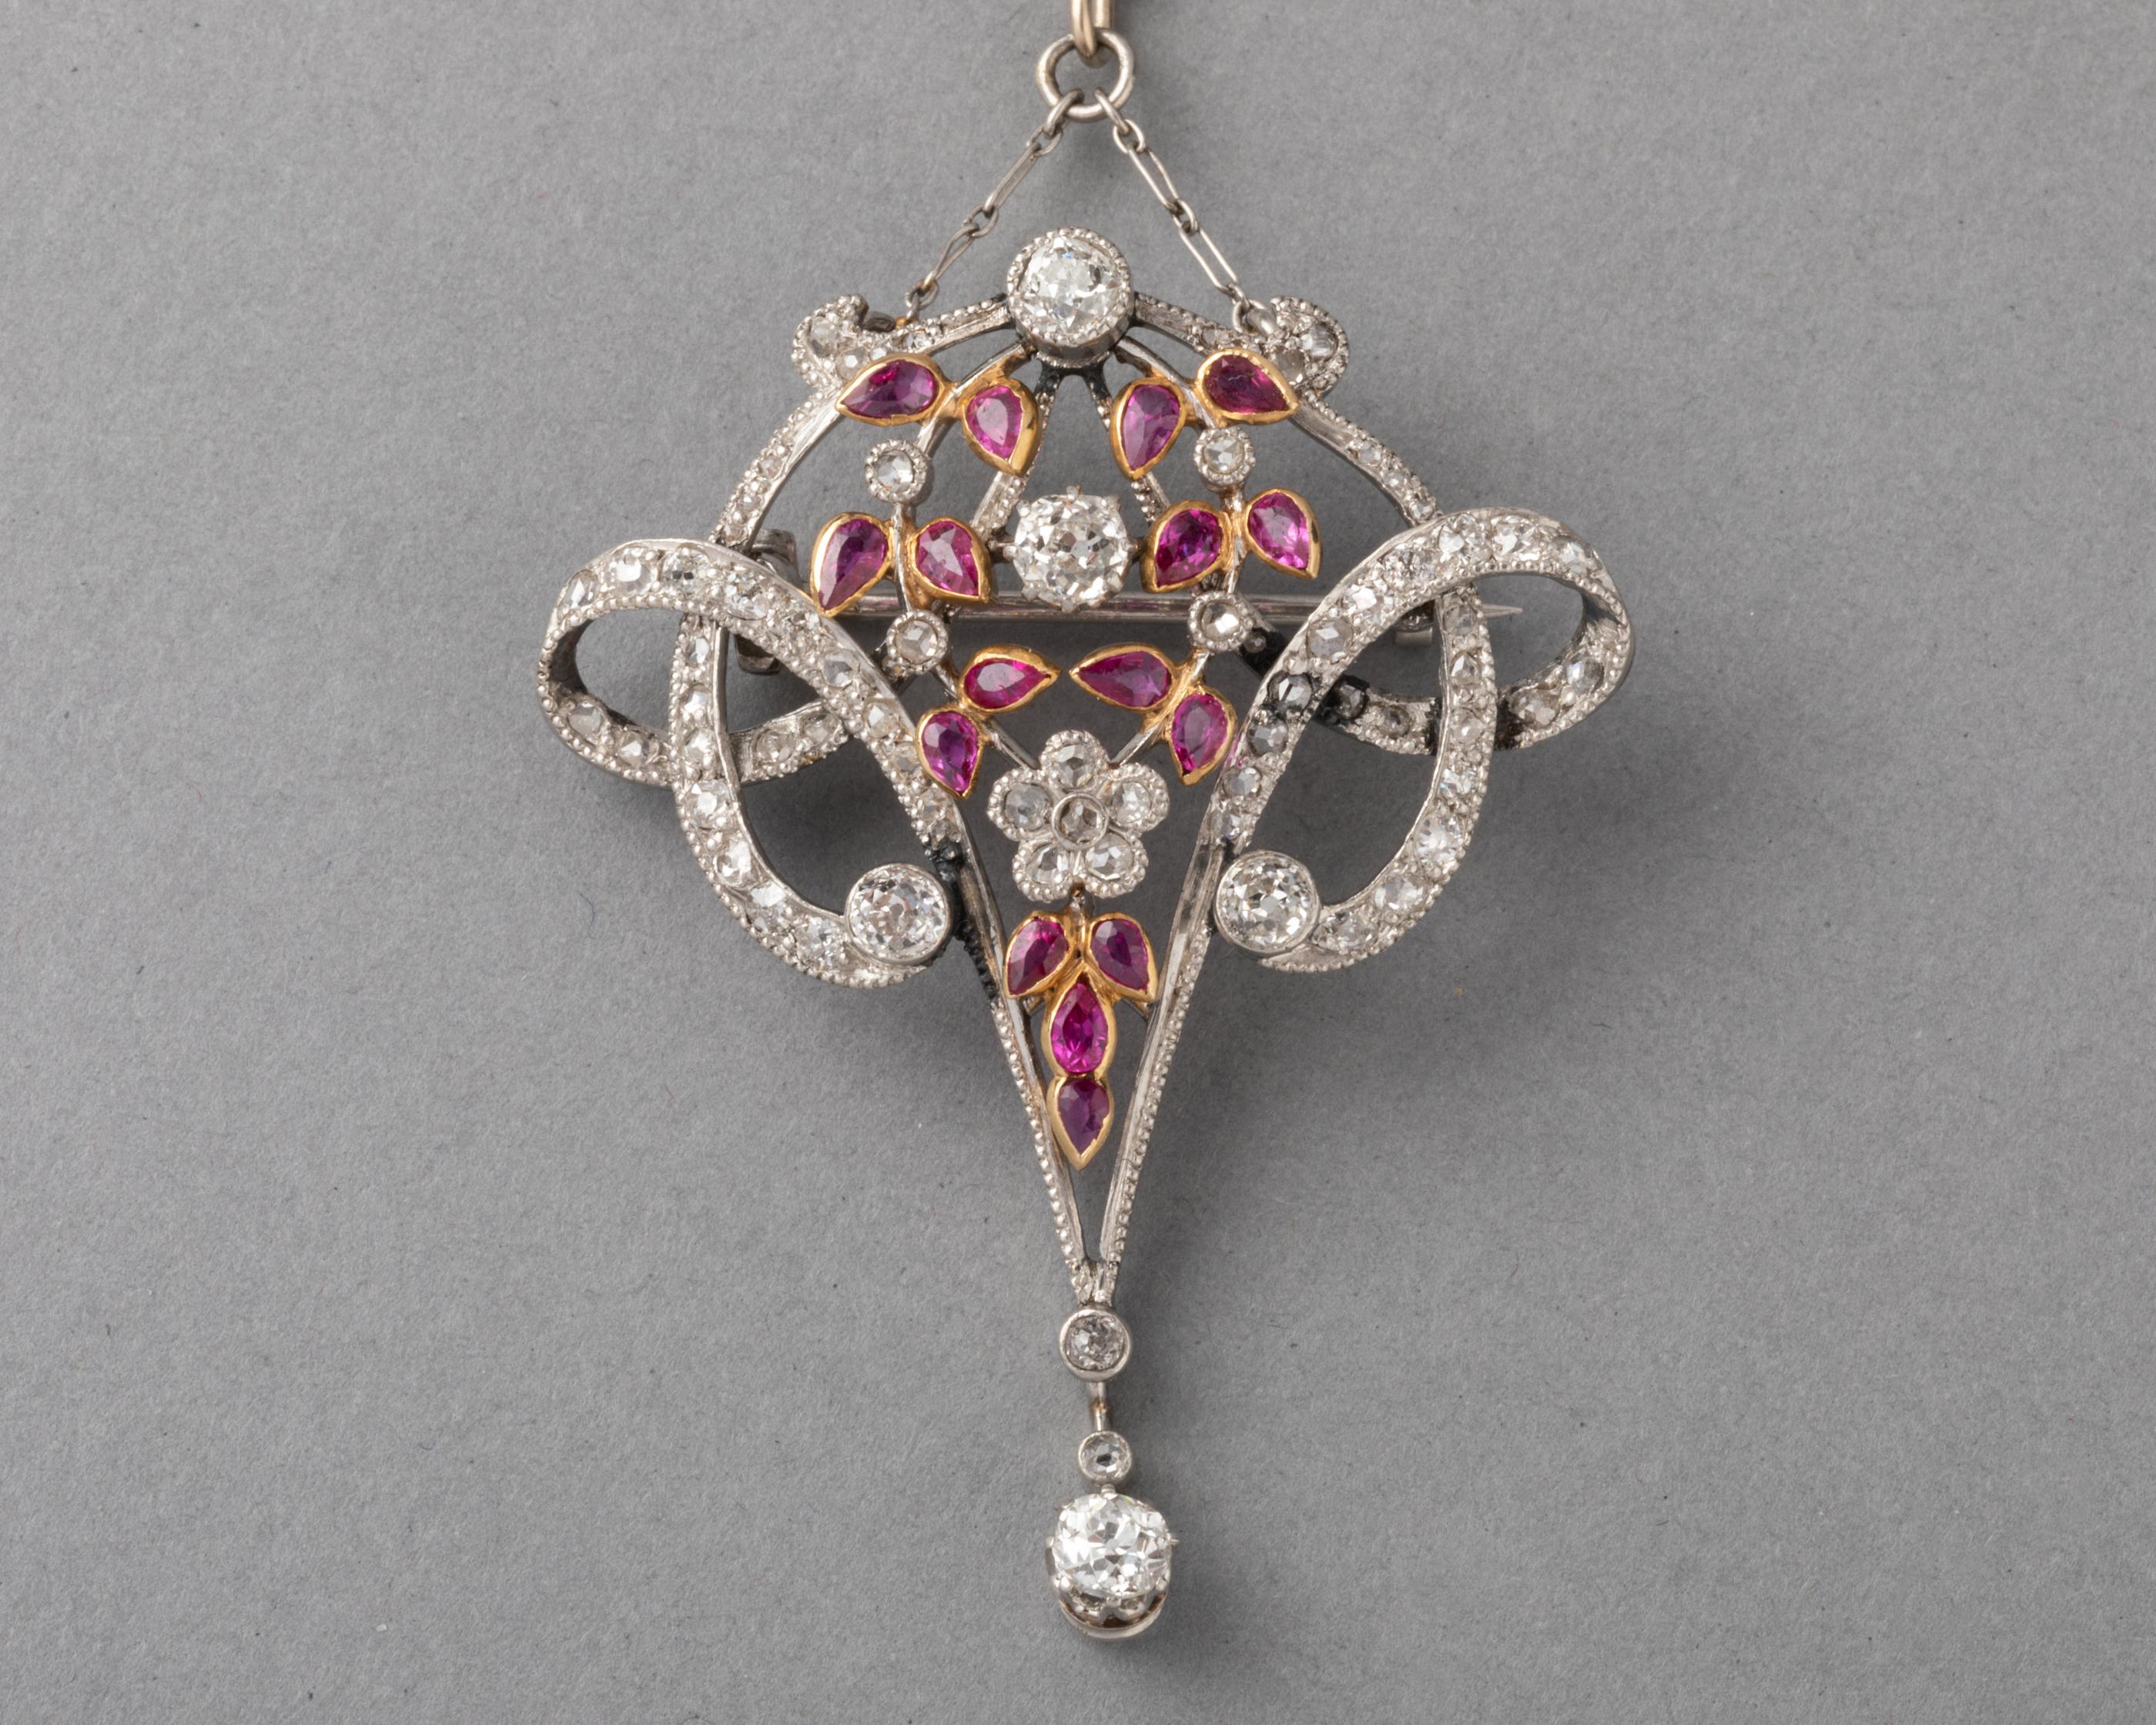 Antique Gold Diamonds and Rubies Pendant Necklace

Beautiful antique pendant necklace. Made in France circa 1900.
18k gold, rubies and diamonds. 
Dimensions: 4.5 cm height, 3.5 cm width.
HAllmarks of Maker (JLR) and numbers. 
The chain measures 60